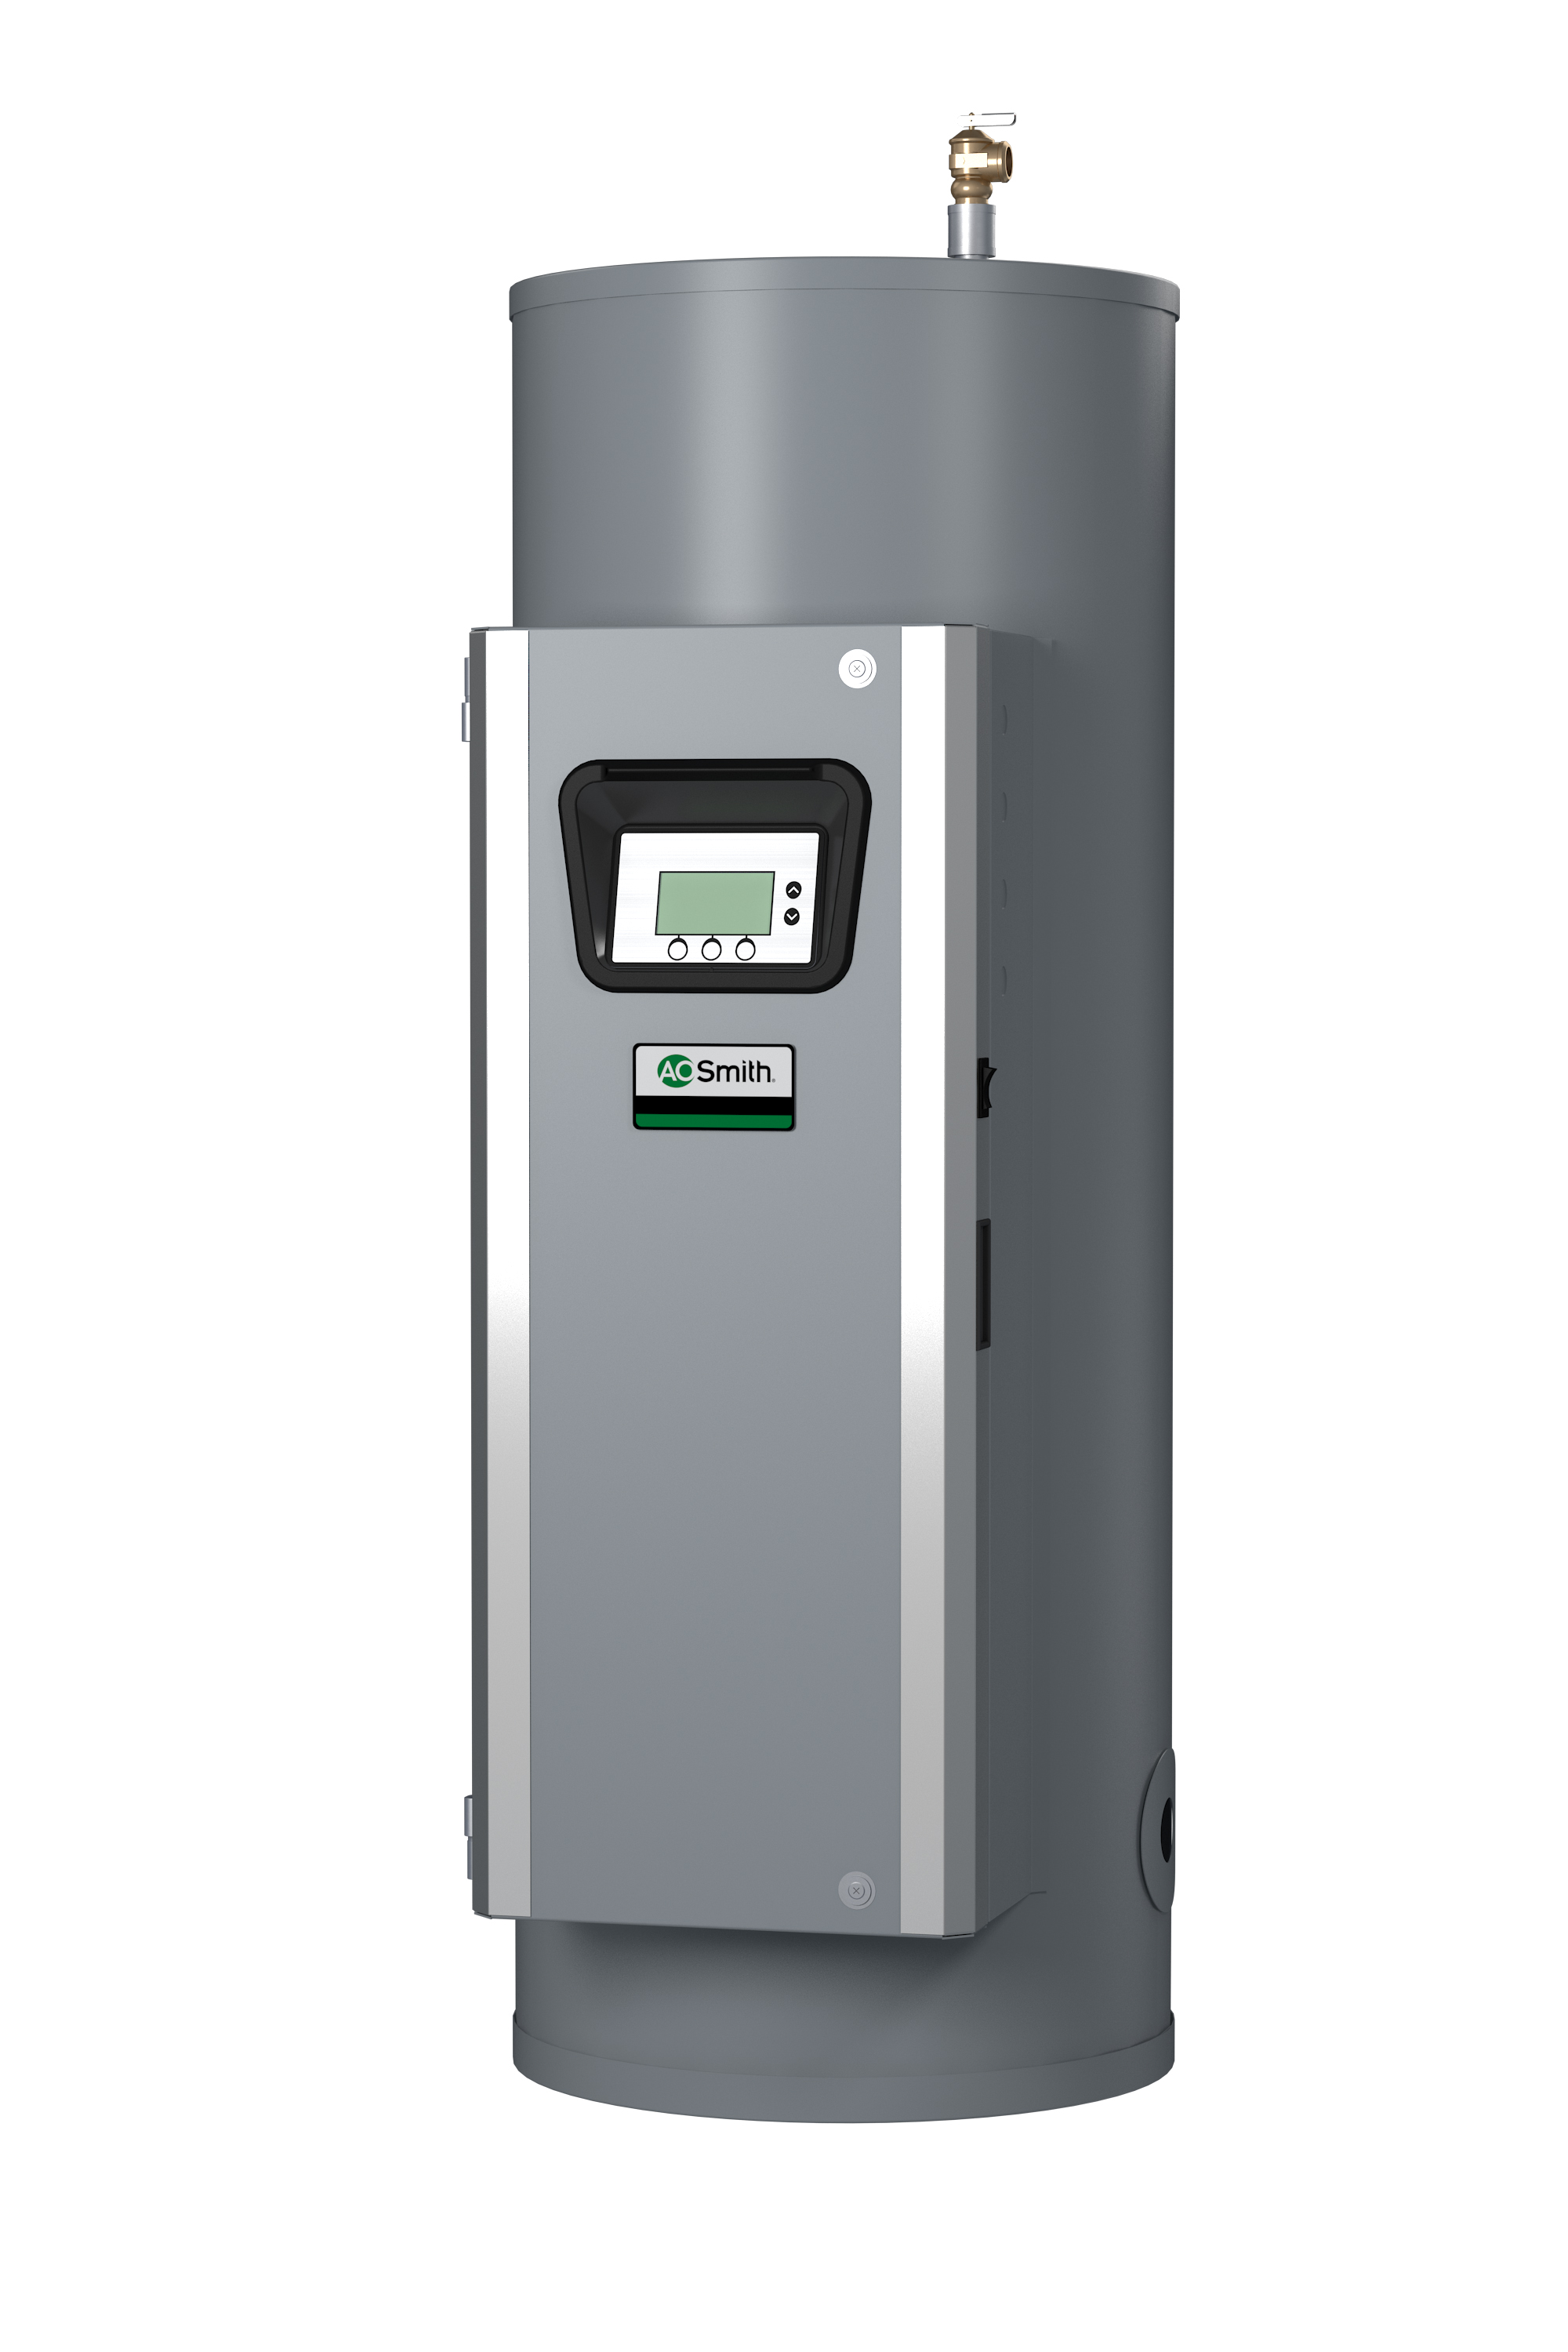 AO SMITH DSE-100A-45, 100 GALLONS, 45KW, 240 VOLT, 108.3 AMPS, 3 PHASE, 3 ELEMENTS, ASME CUSTOM Xi SERIES HEAVY DUTY COMMERCIAL ELECTRIC WATER HEATER